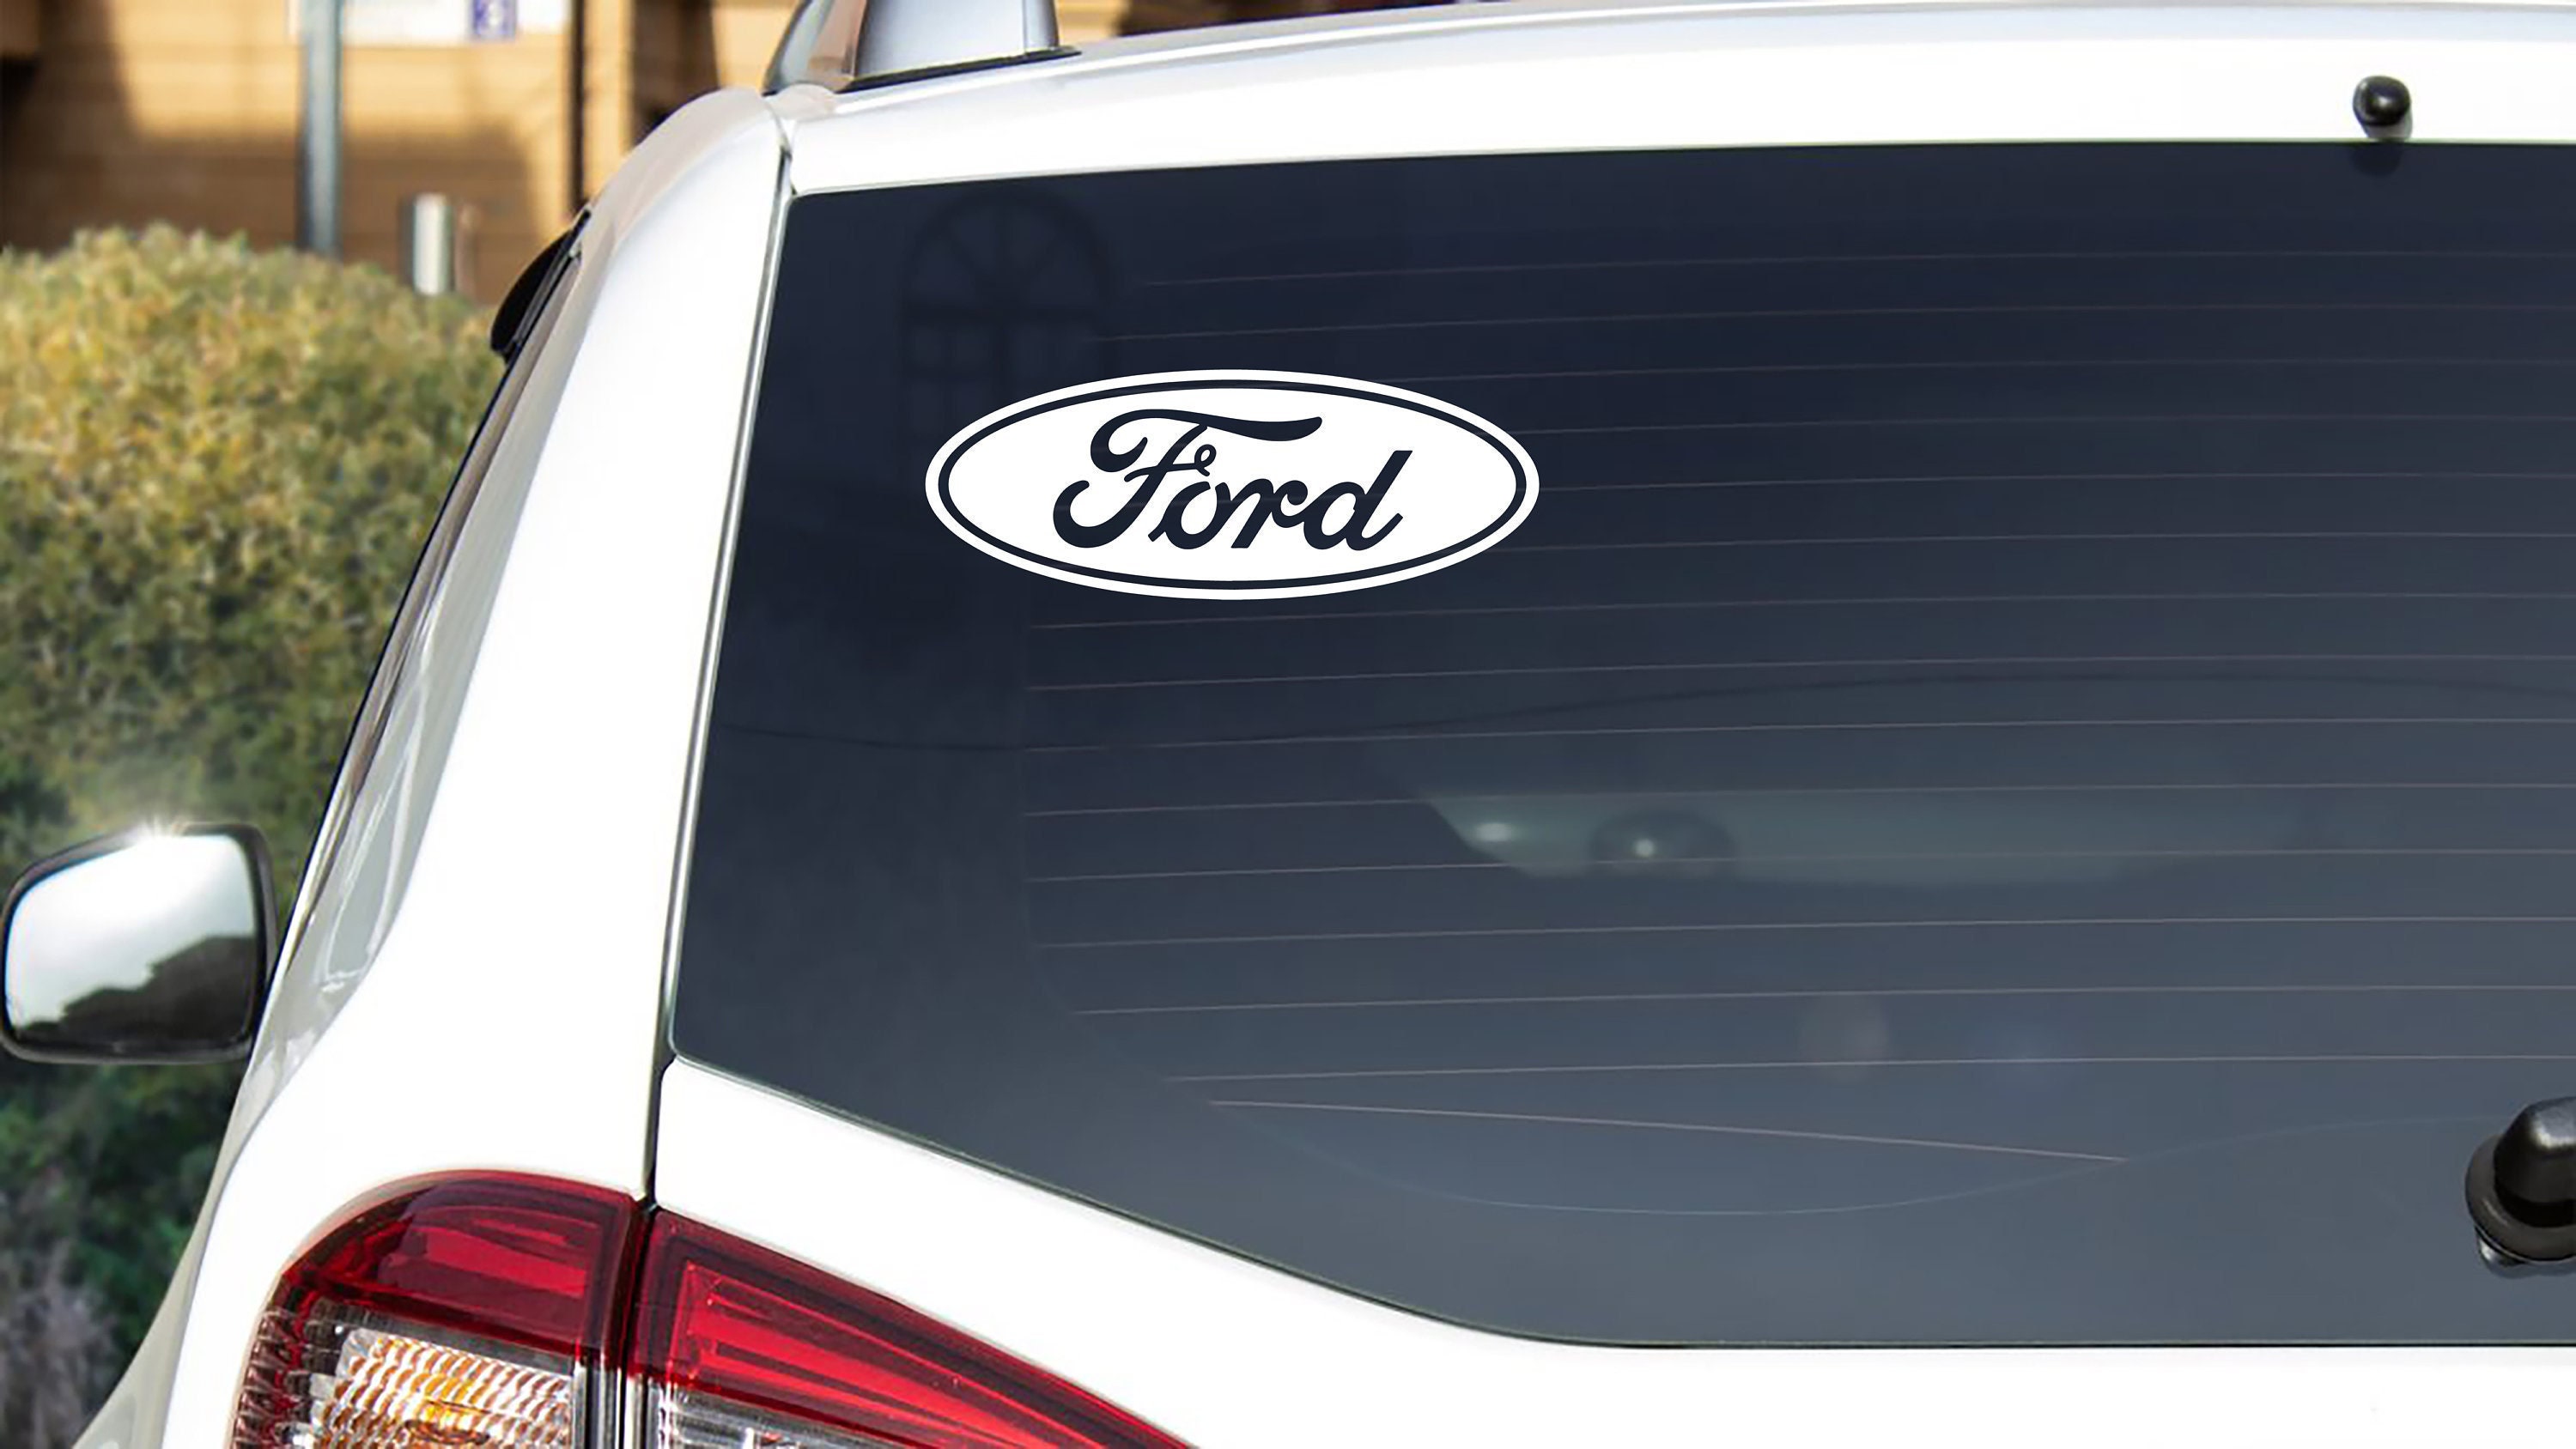 Ford Logo Vinyl Sticker Decal Car Decal Truck Decal Ford Etsy